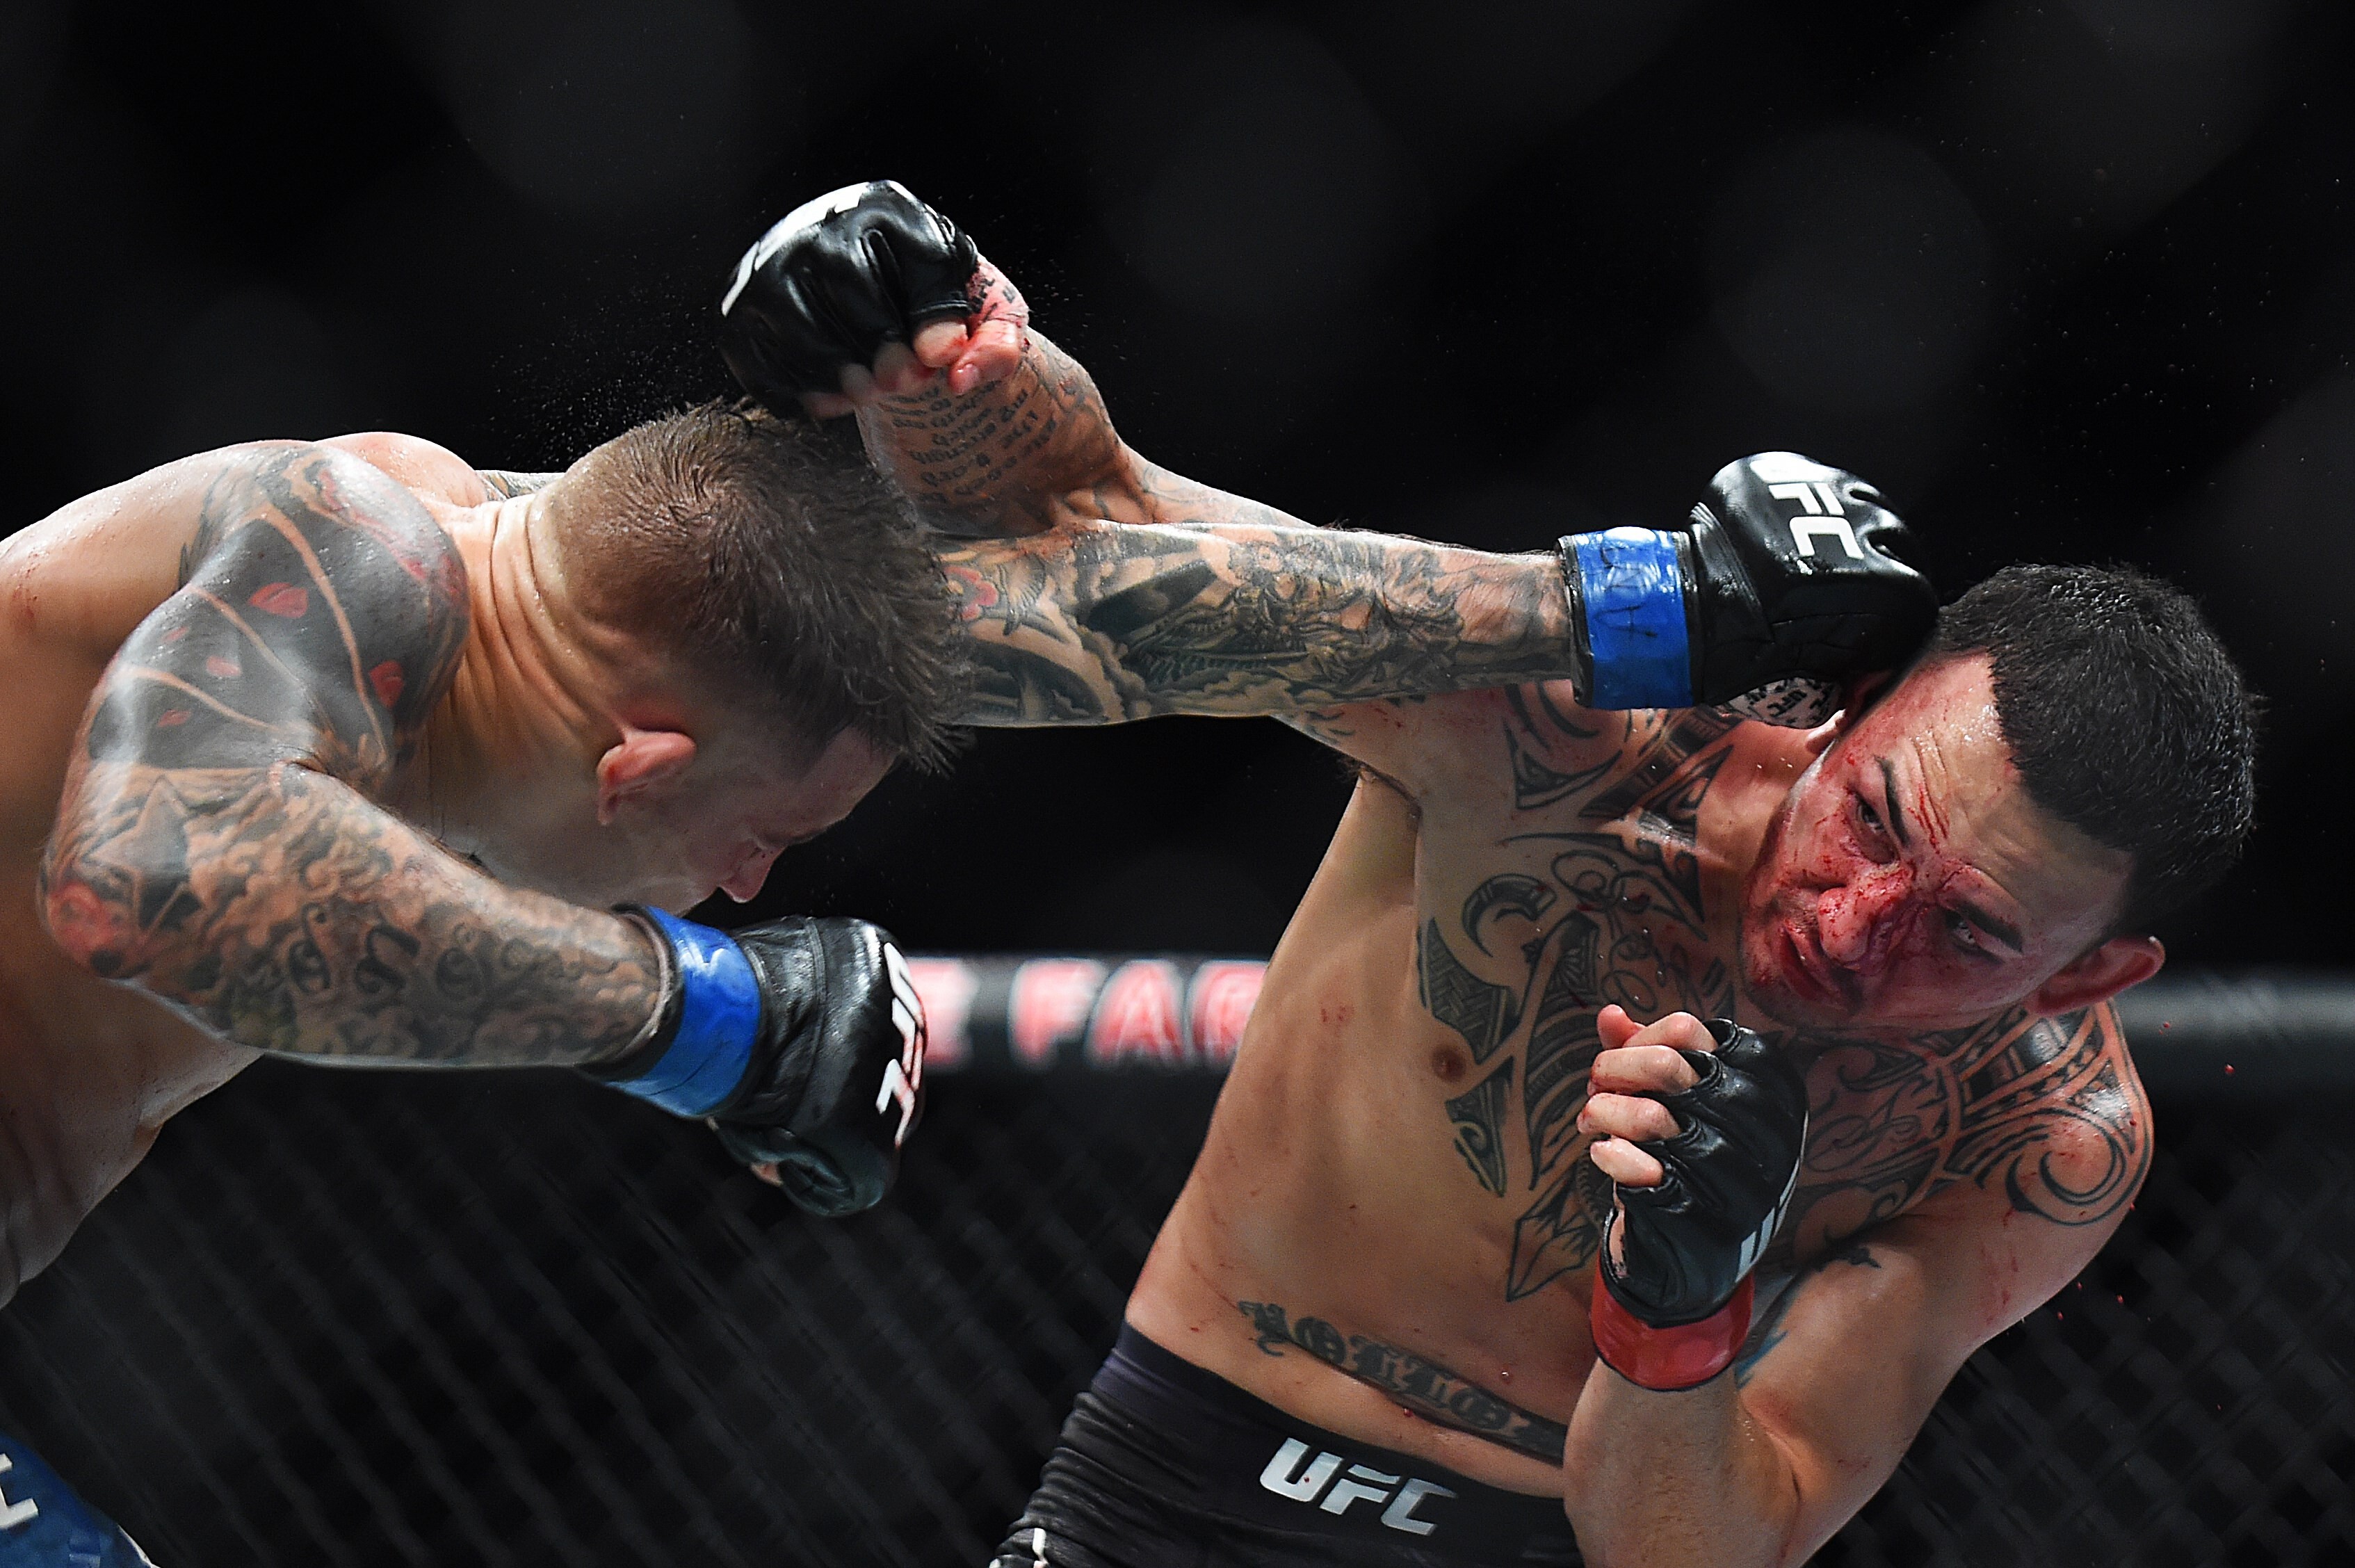 Max Holloway trading blows with Dustin Poirier at UFC 236. Photo: AFP